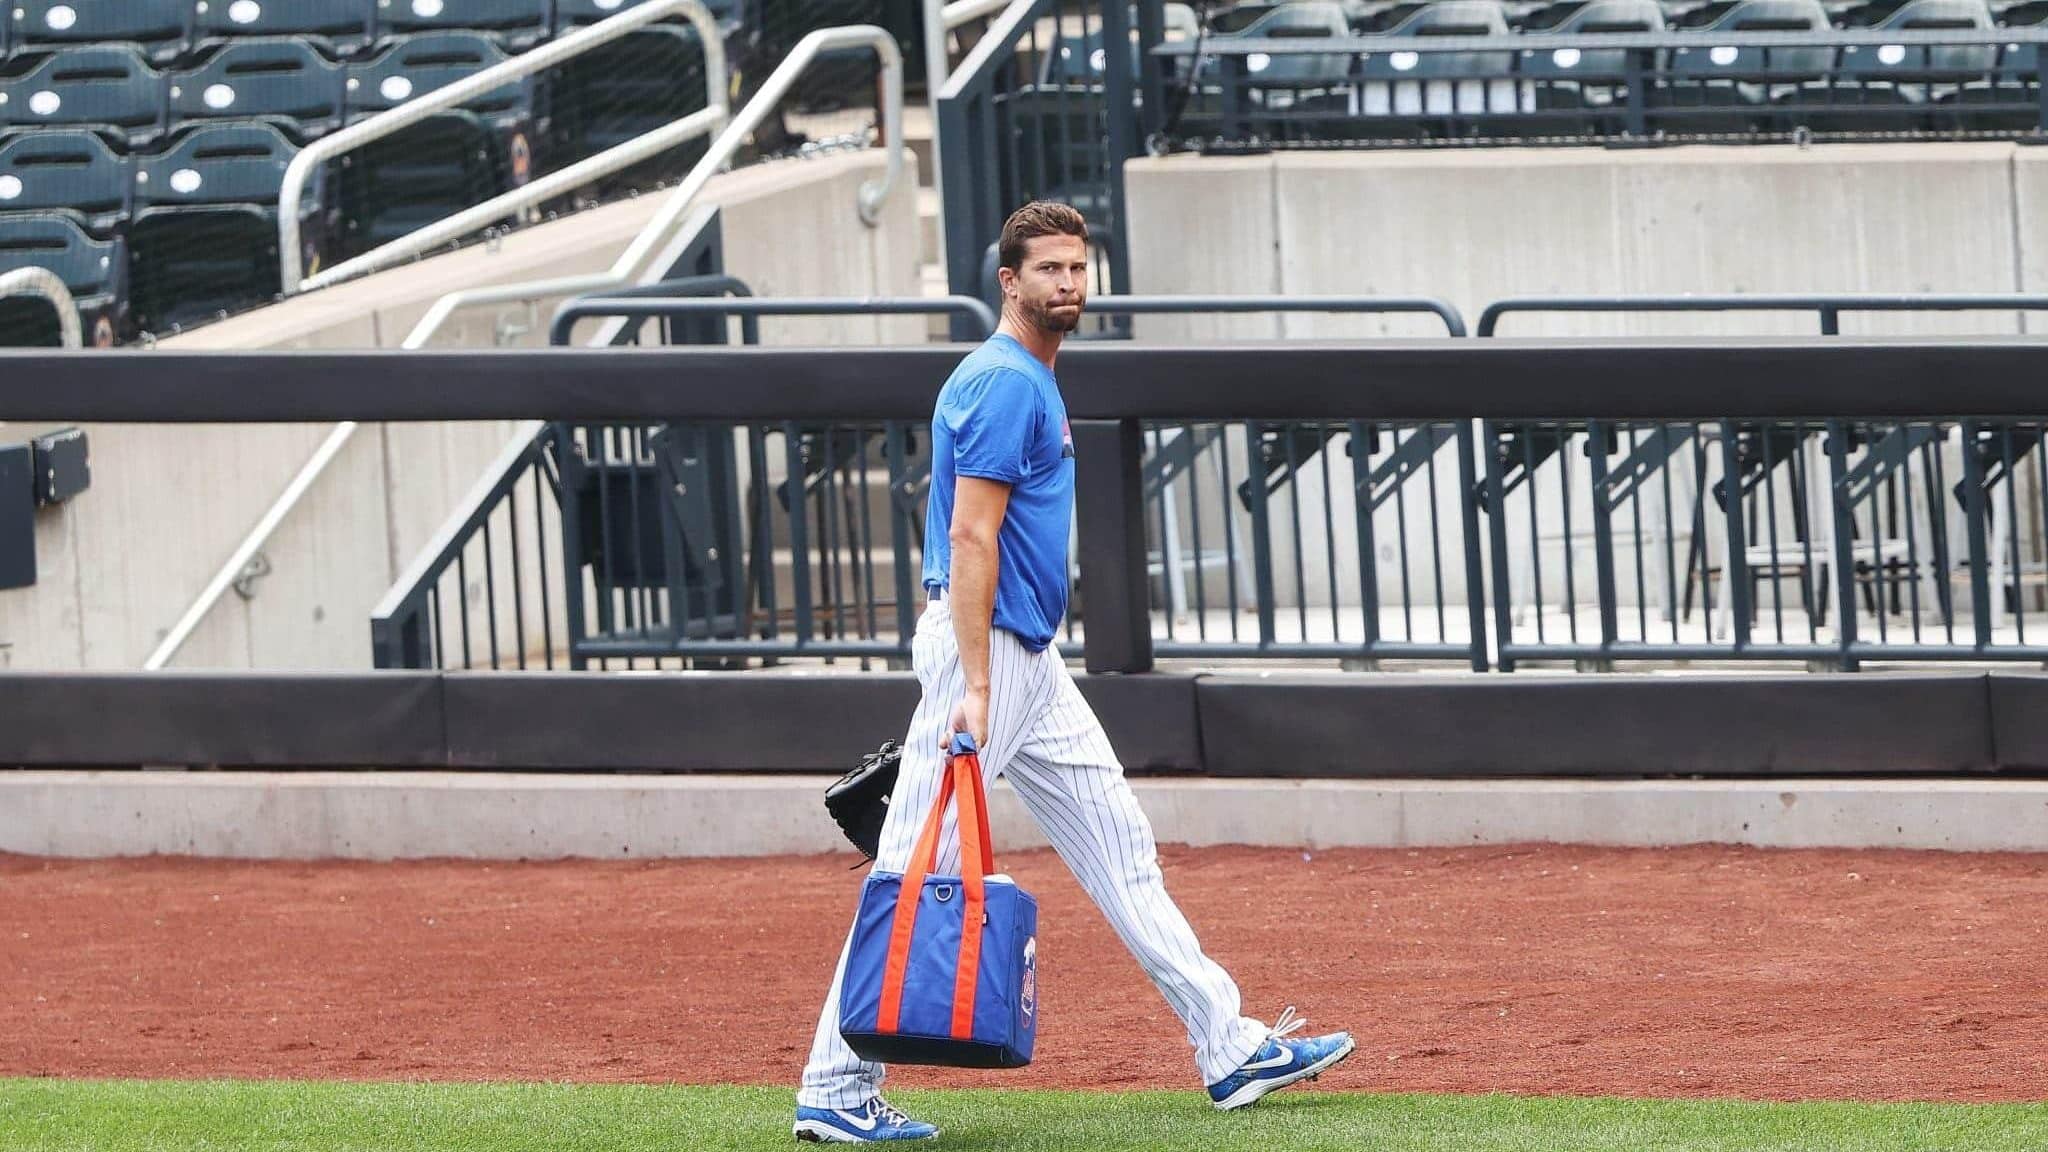 NEW YORK, NEW YORK - JULY 03: Jacob deGrom #48 of the New York Mets walks off the field after his workout during Major League Baseball Summer Training restart at Citi Field on July 03, 2020 in New York City.